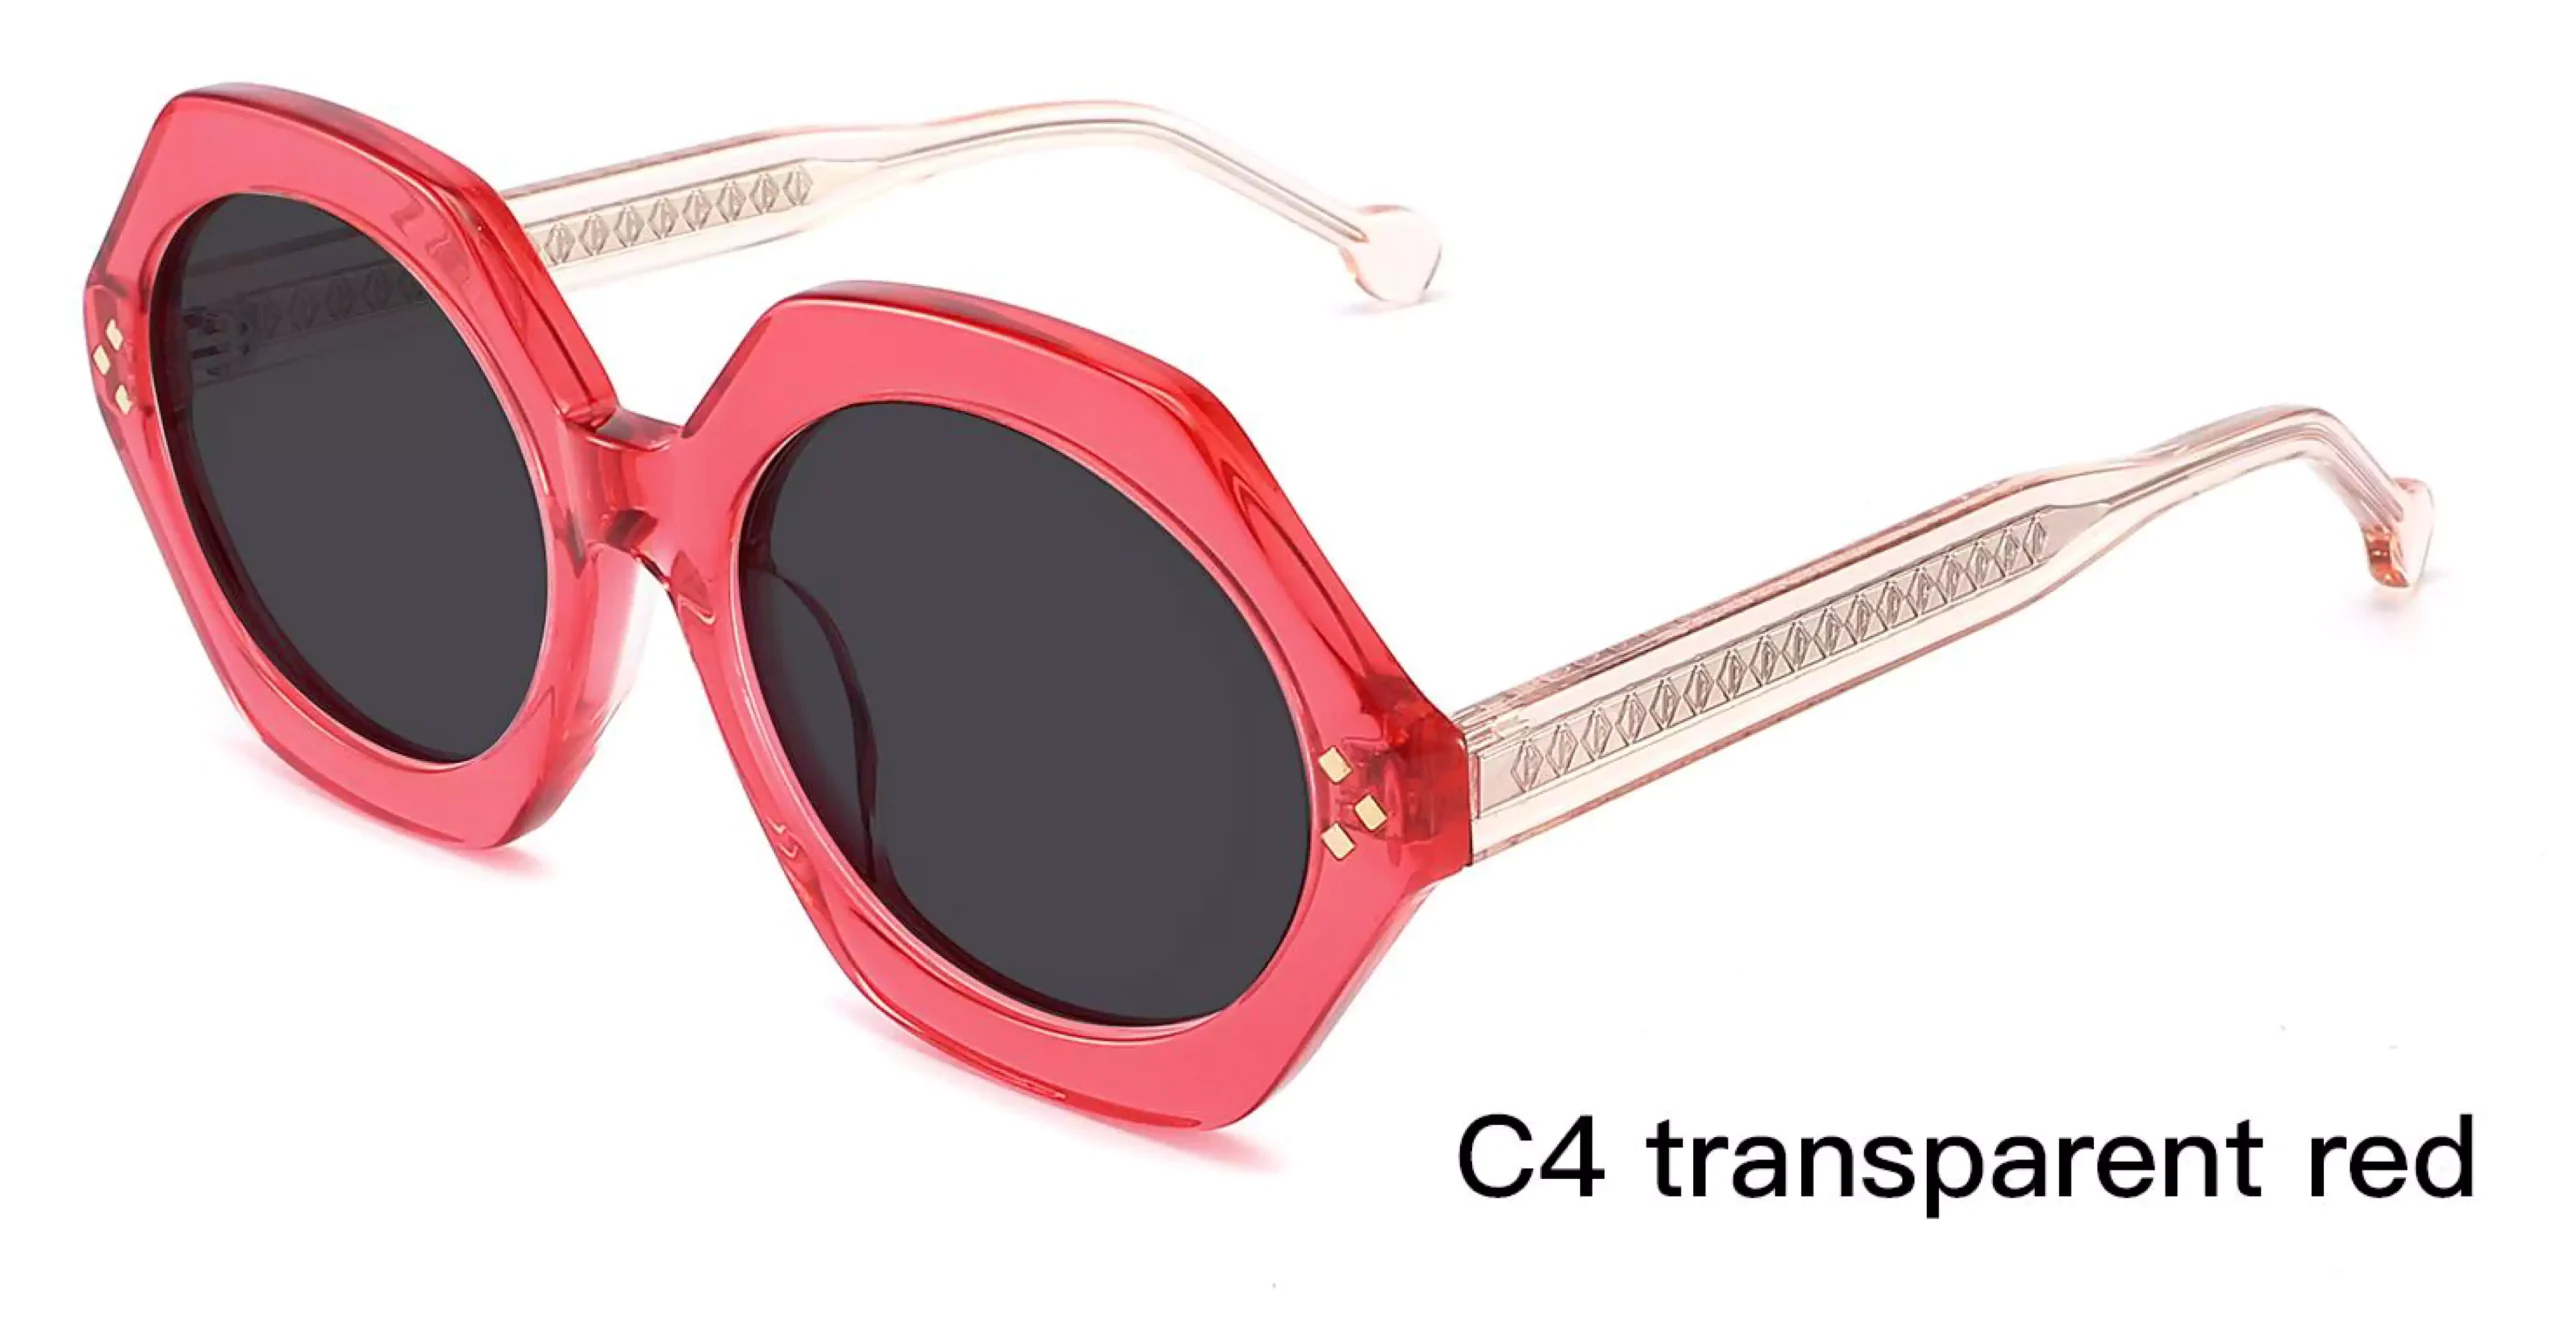 Trendy Sunglasses Wholesale Geometric,frames front Transparent Red, pink temples, rivets, laser engraved wire cores, acetate sunglasses, UV blocking, fashion sunglasses